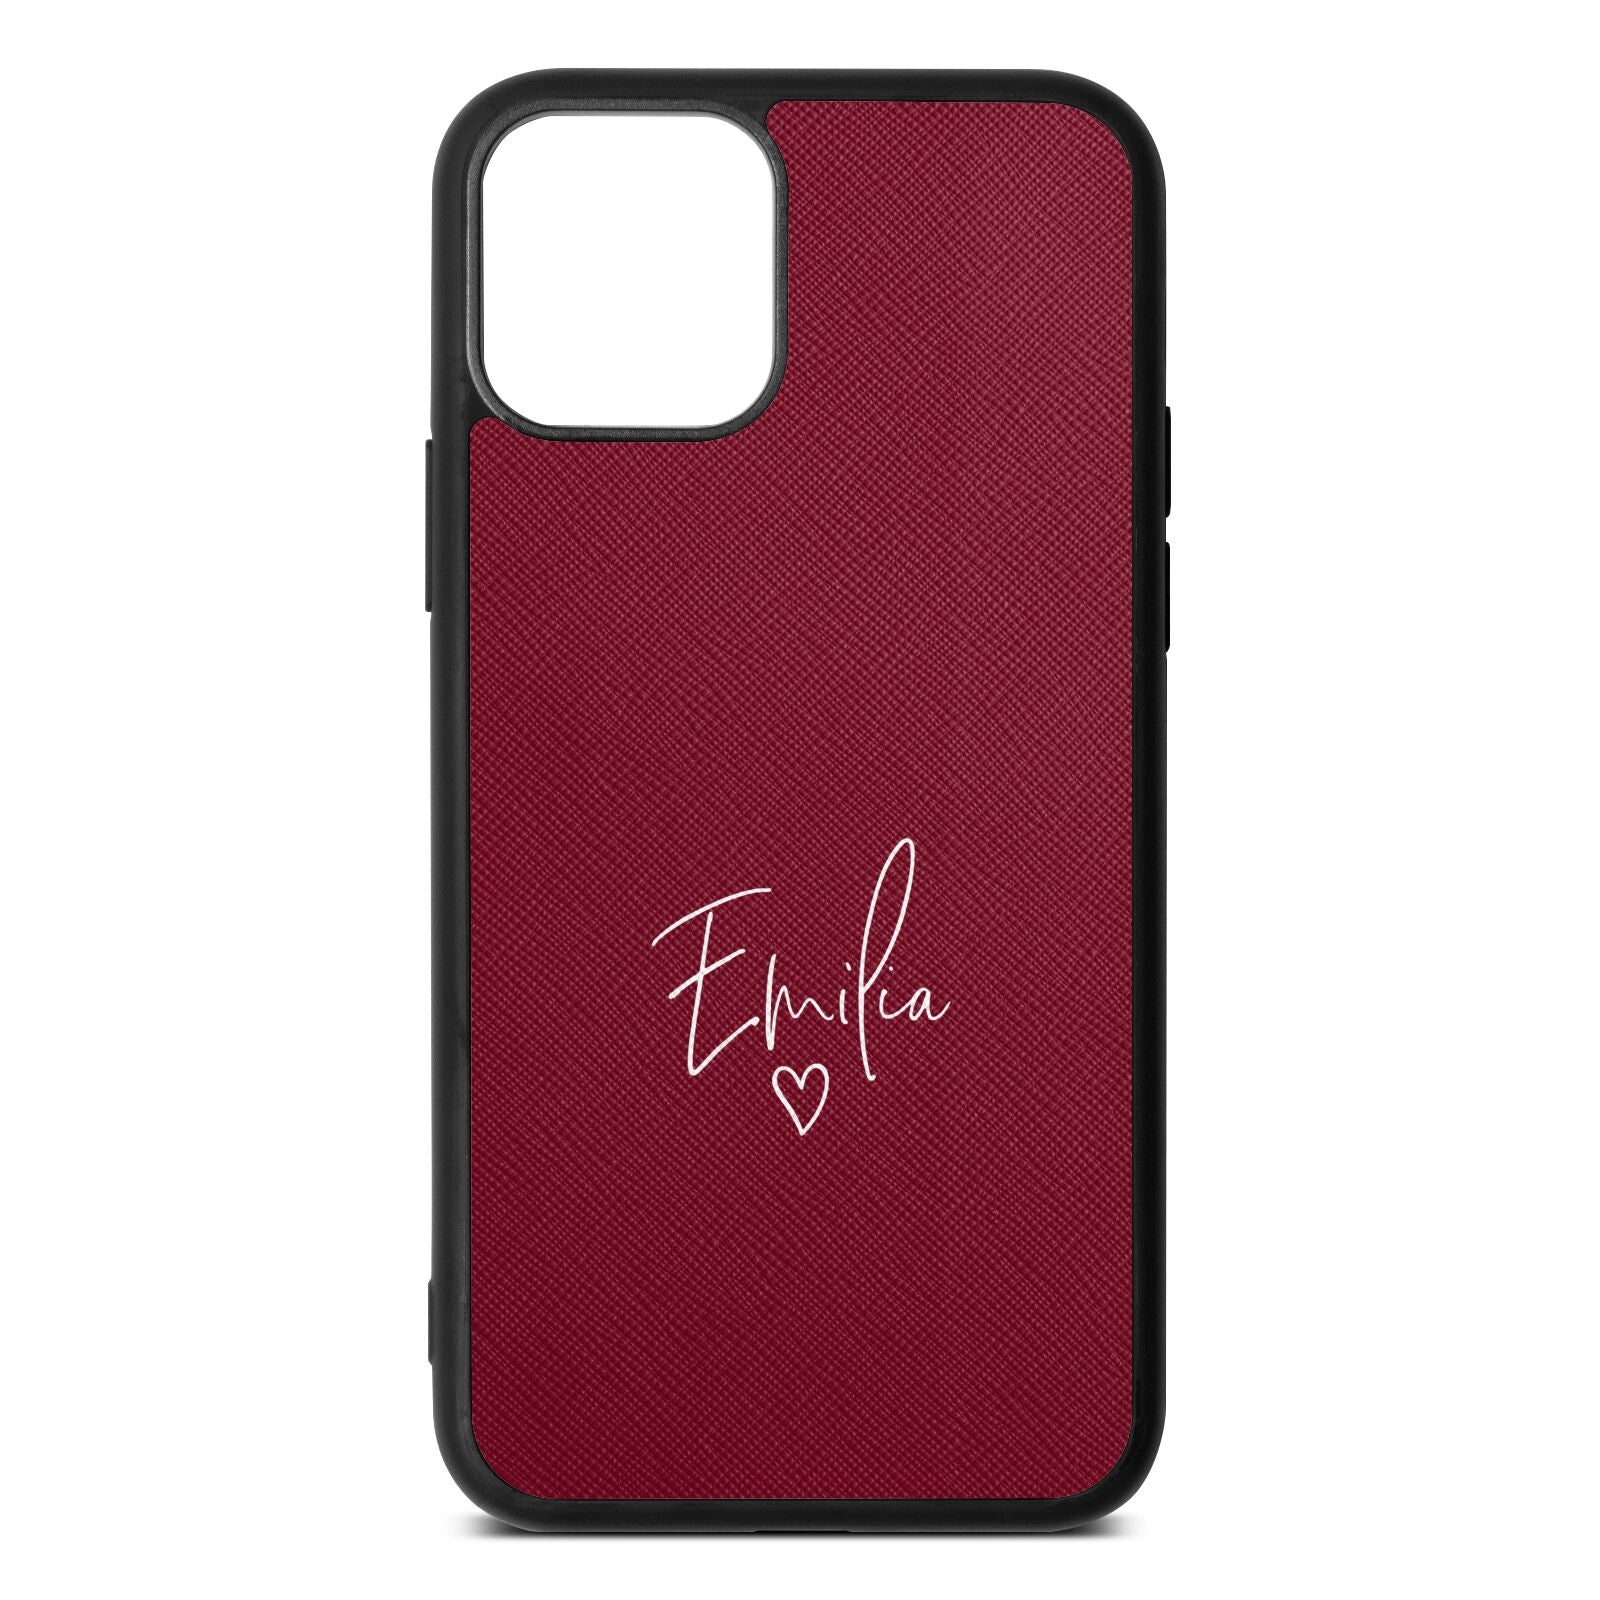 White Handwritten Name Transparent Wine Red Saffiano Leather iPhone 11 Pro Case